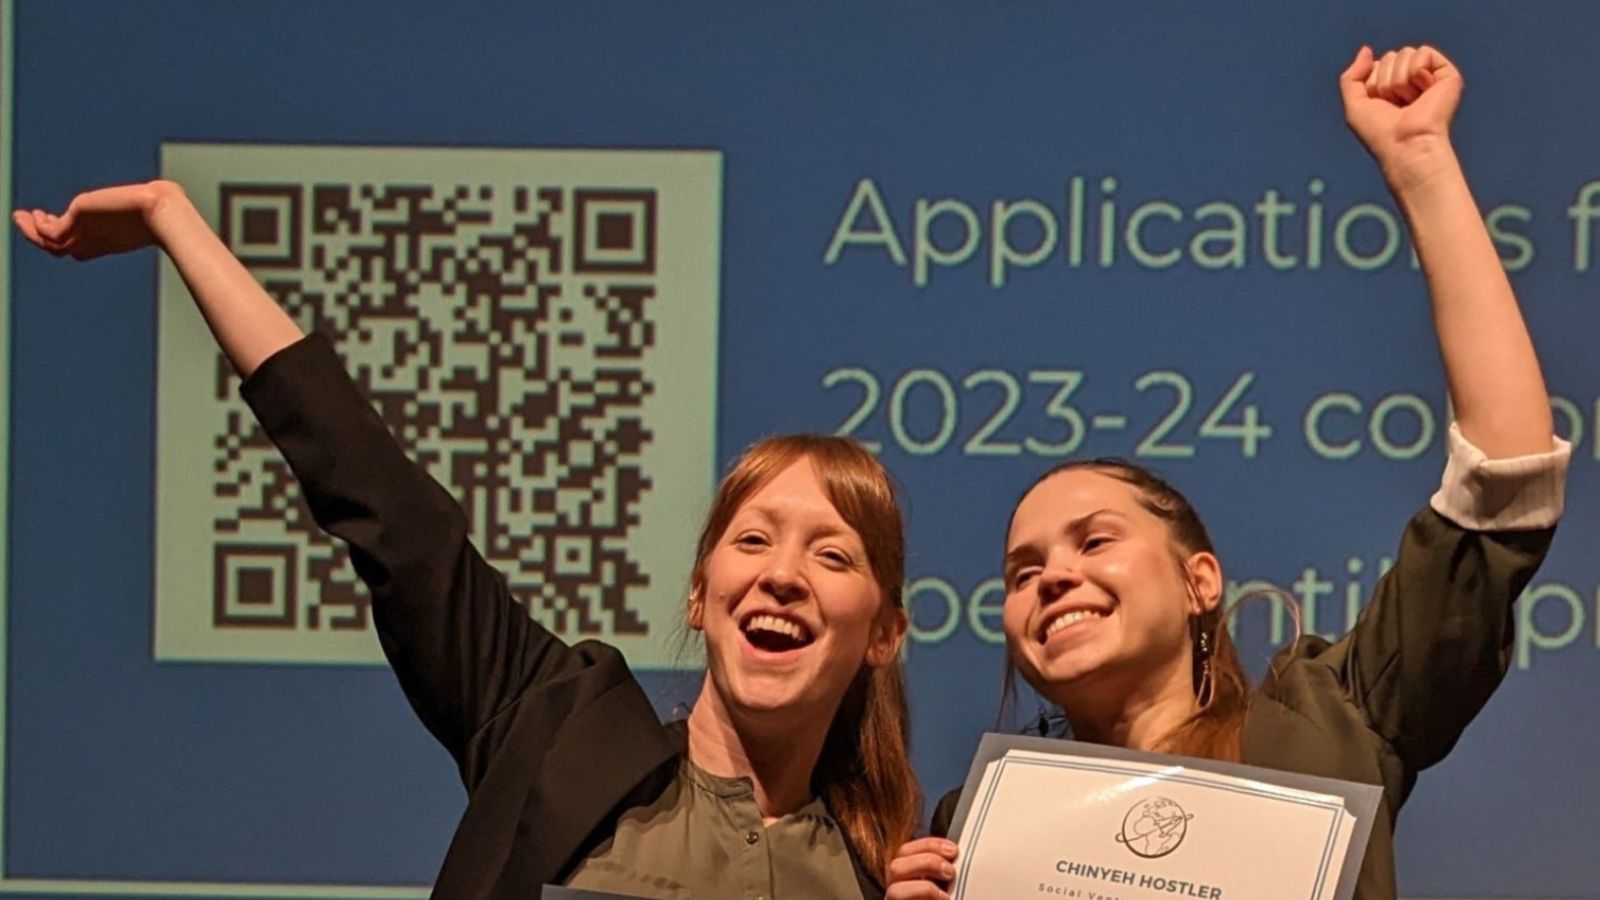 A Septic Mixer Project by environmental engineering students Lily Astete Vasquez and Polina Popova won second place in the ZIP/Lavin Social Venture Challenge. “The product will improve sanitation for millions of septic tank users.”